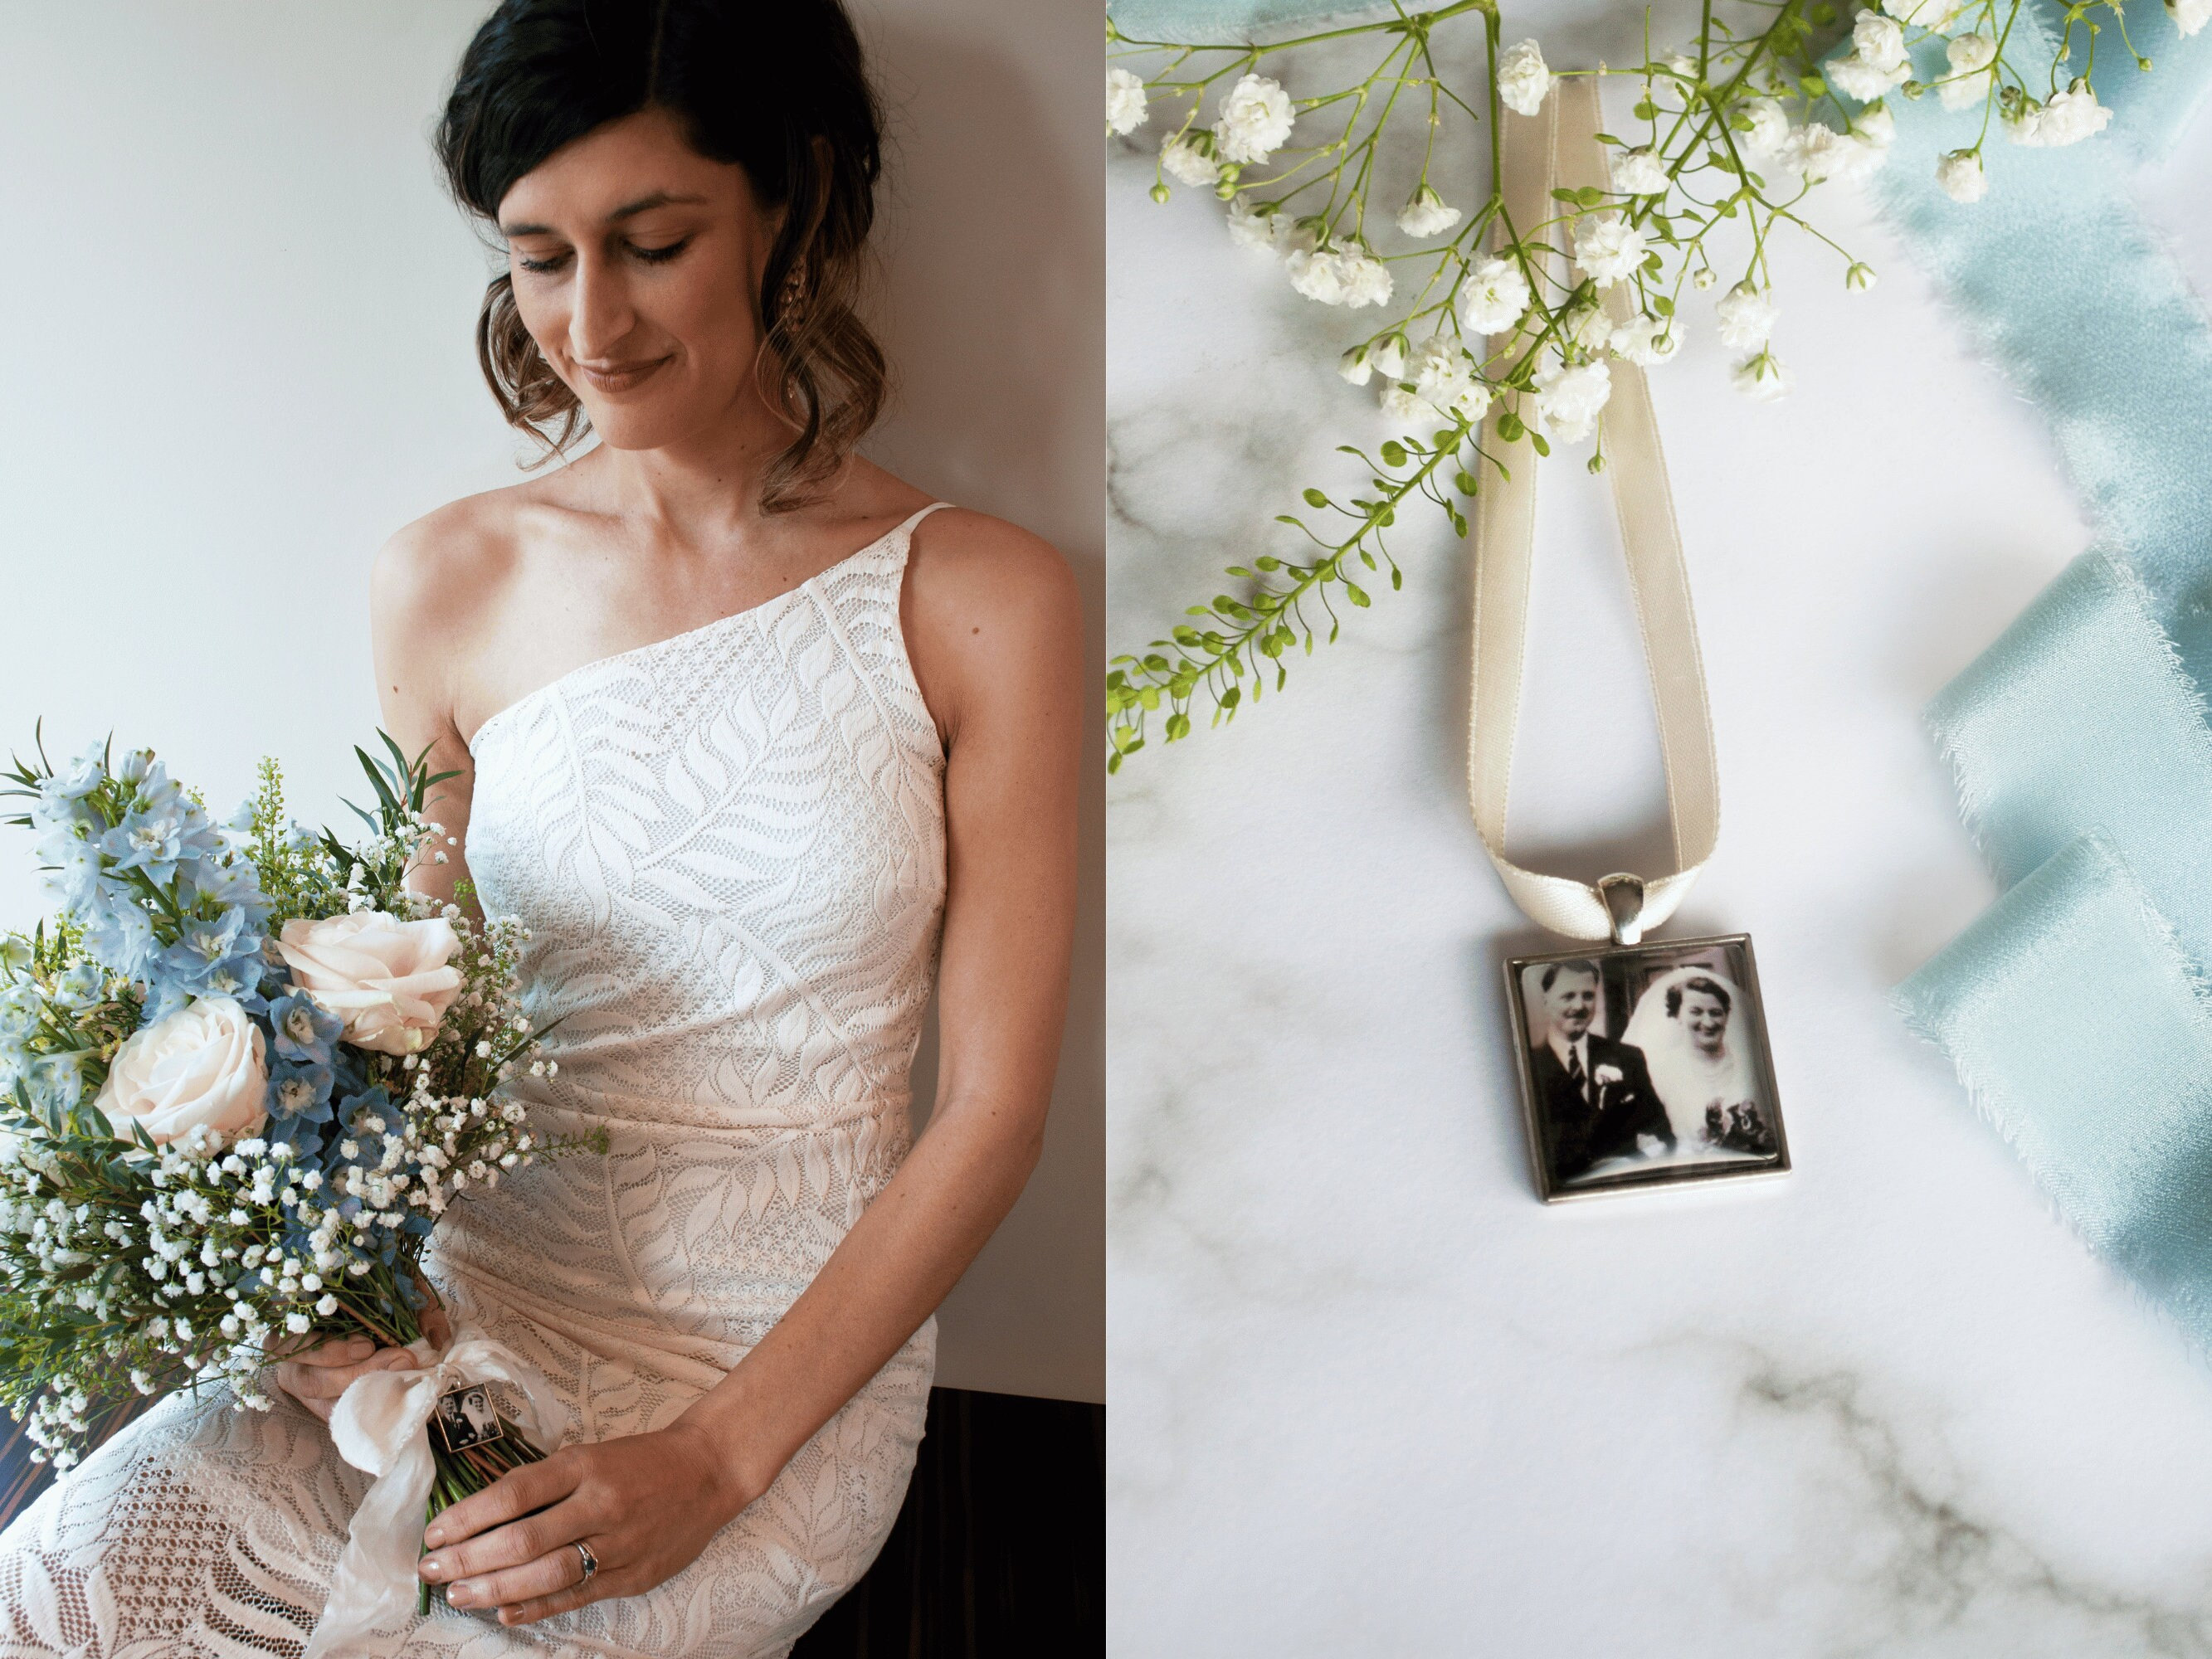 Bridal bouquet charms - set of two custom photo wedding bouquet charms –  Now That's Personal!